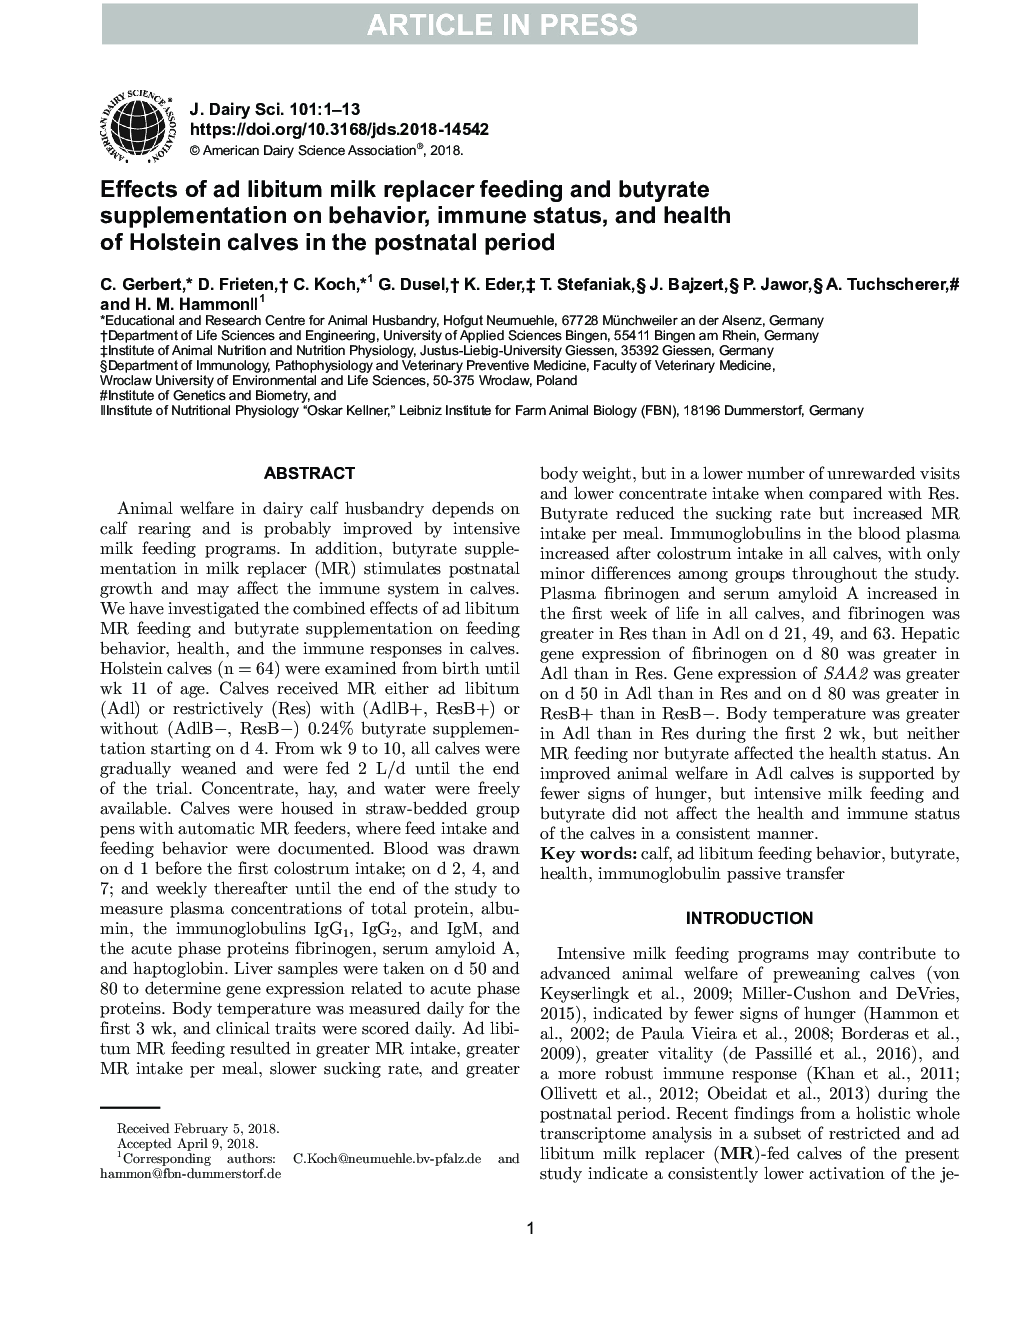 Effects of ad libitum milk replacer feeding and butyrate supplementation on behavior, immune status, and health of Holstein calves in the postnatal period